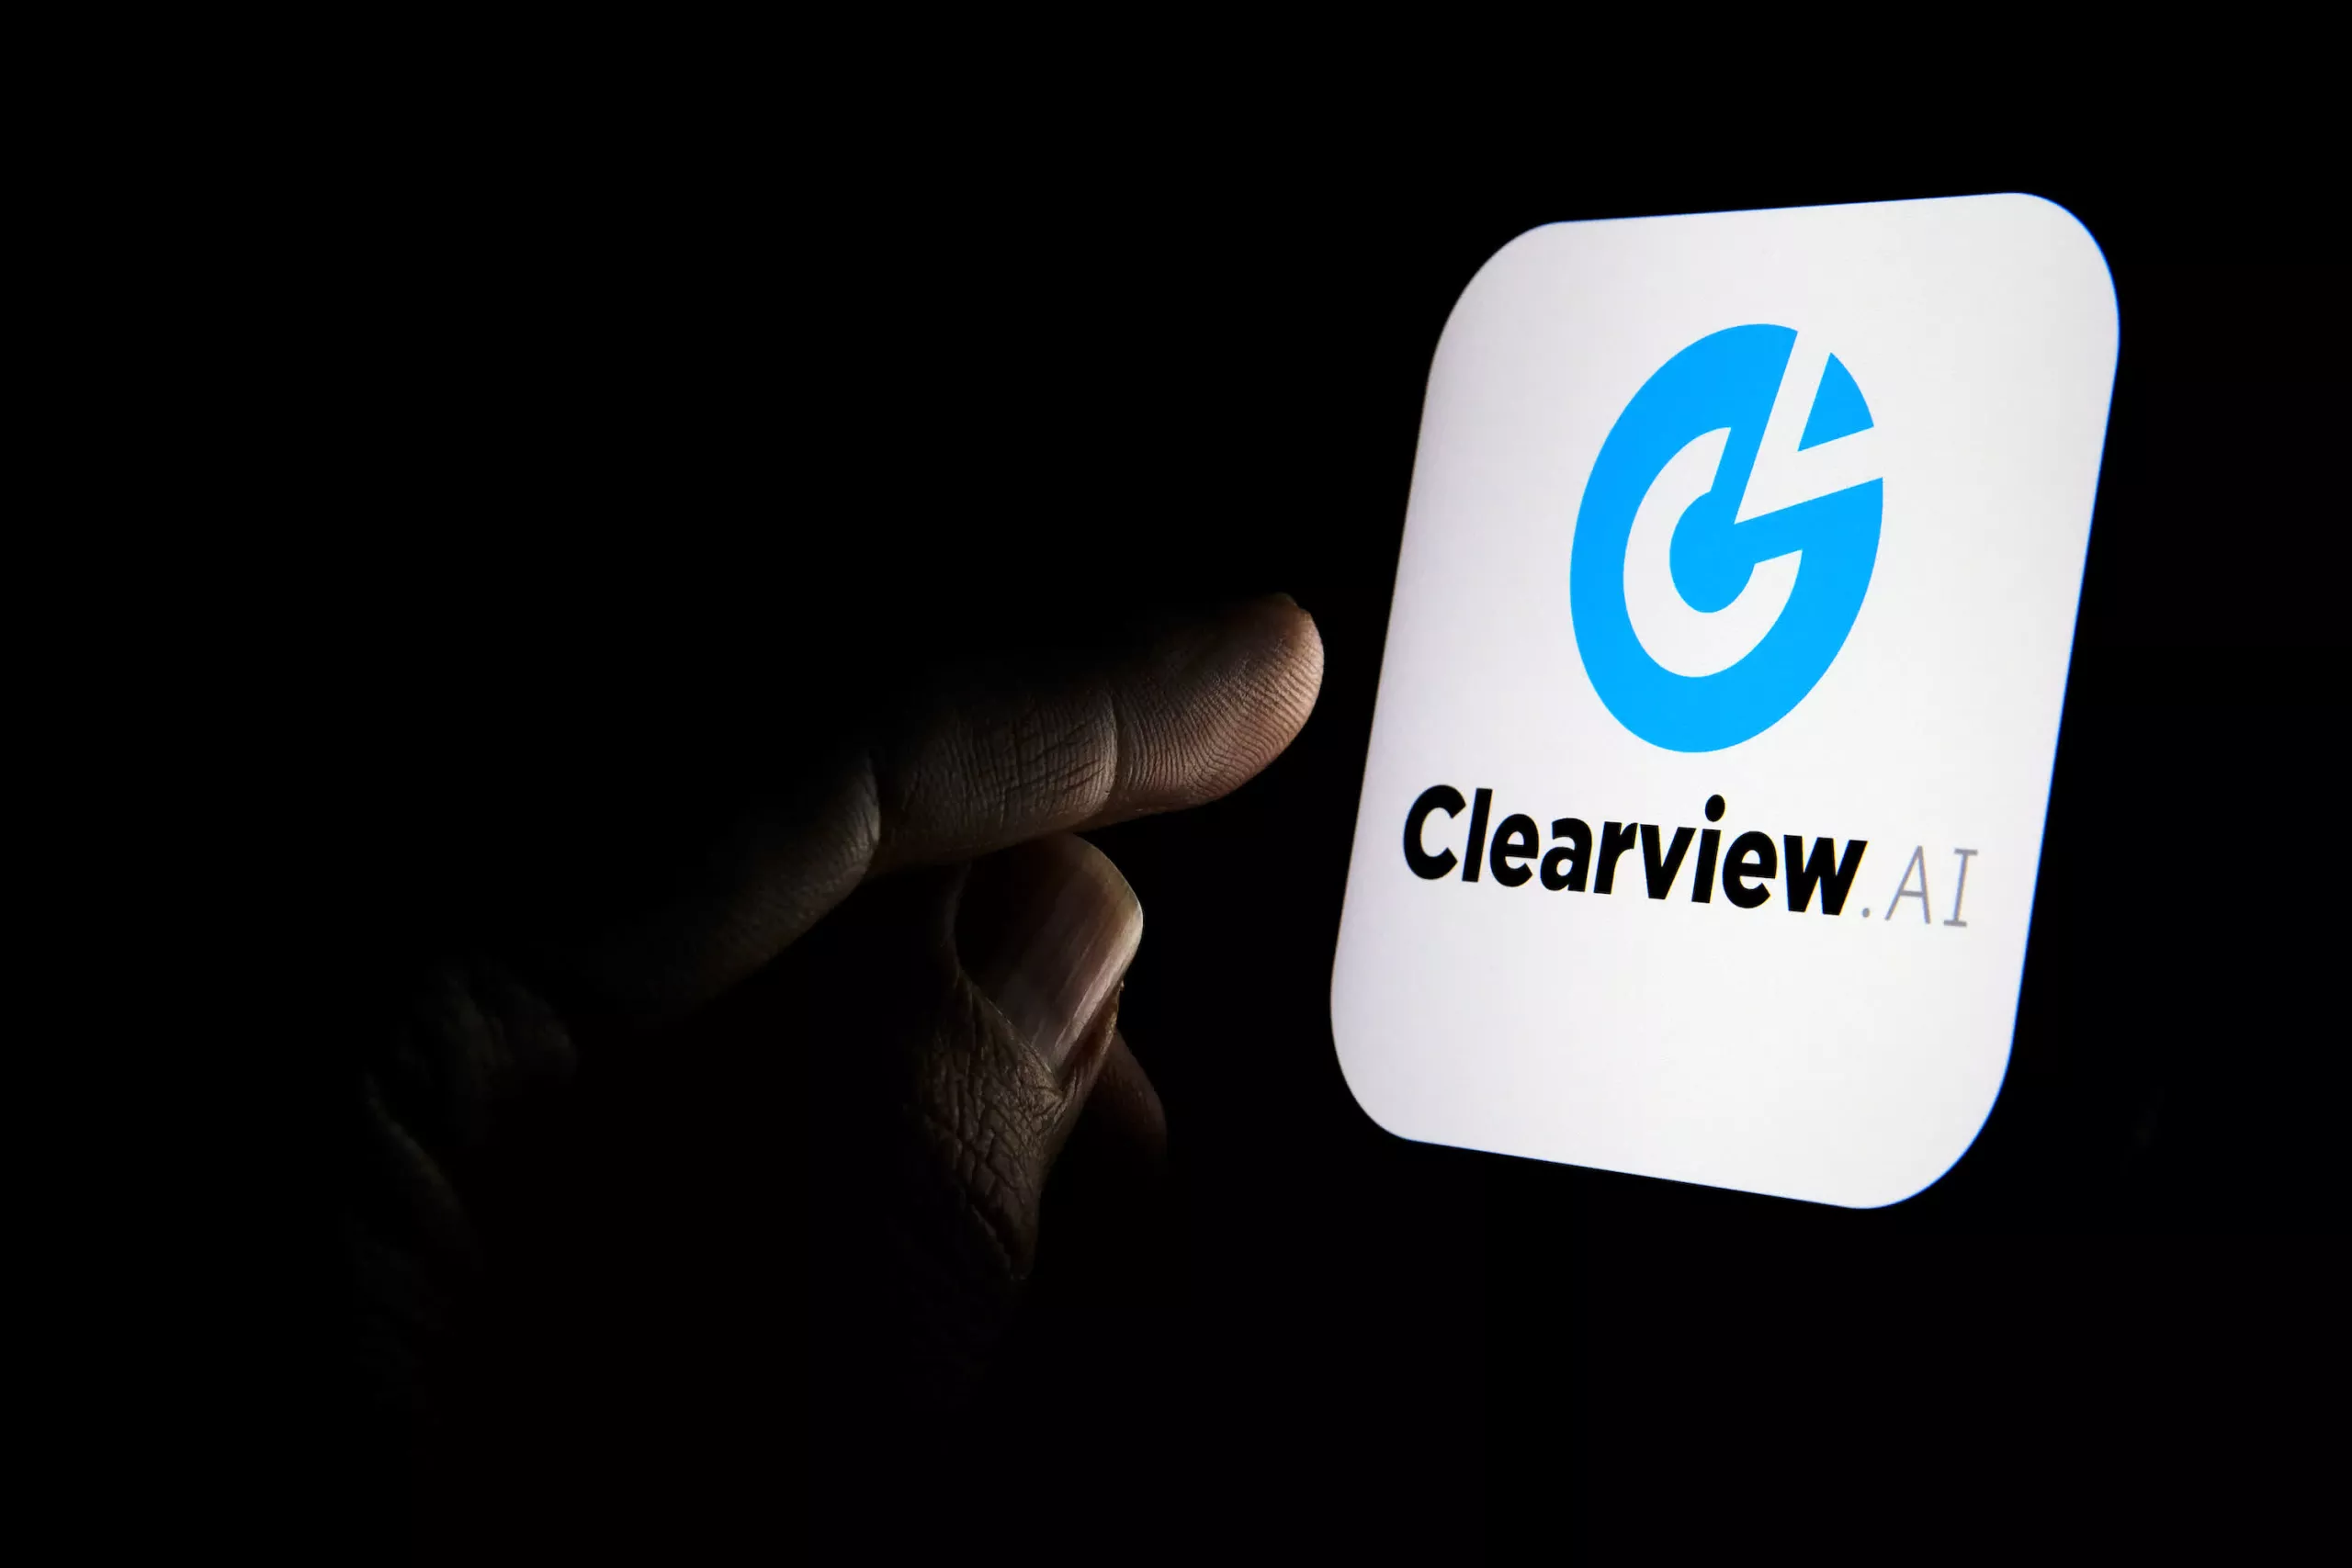 clearview-ai-wants-to-pay-americans-pennies-in-company-equity-for-violating-their-privacy-[techspot]